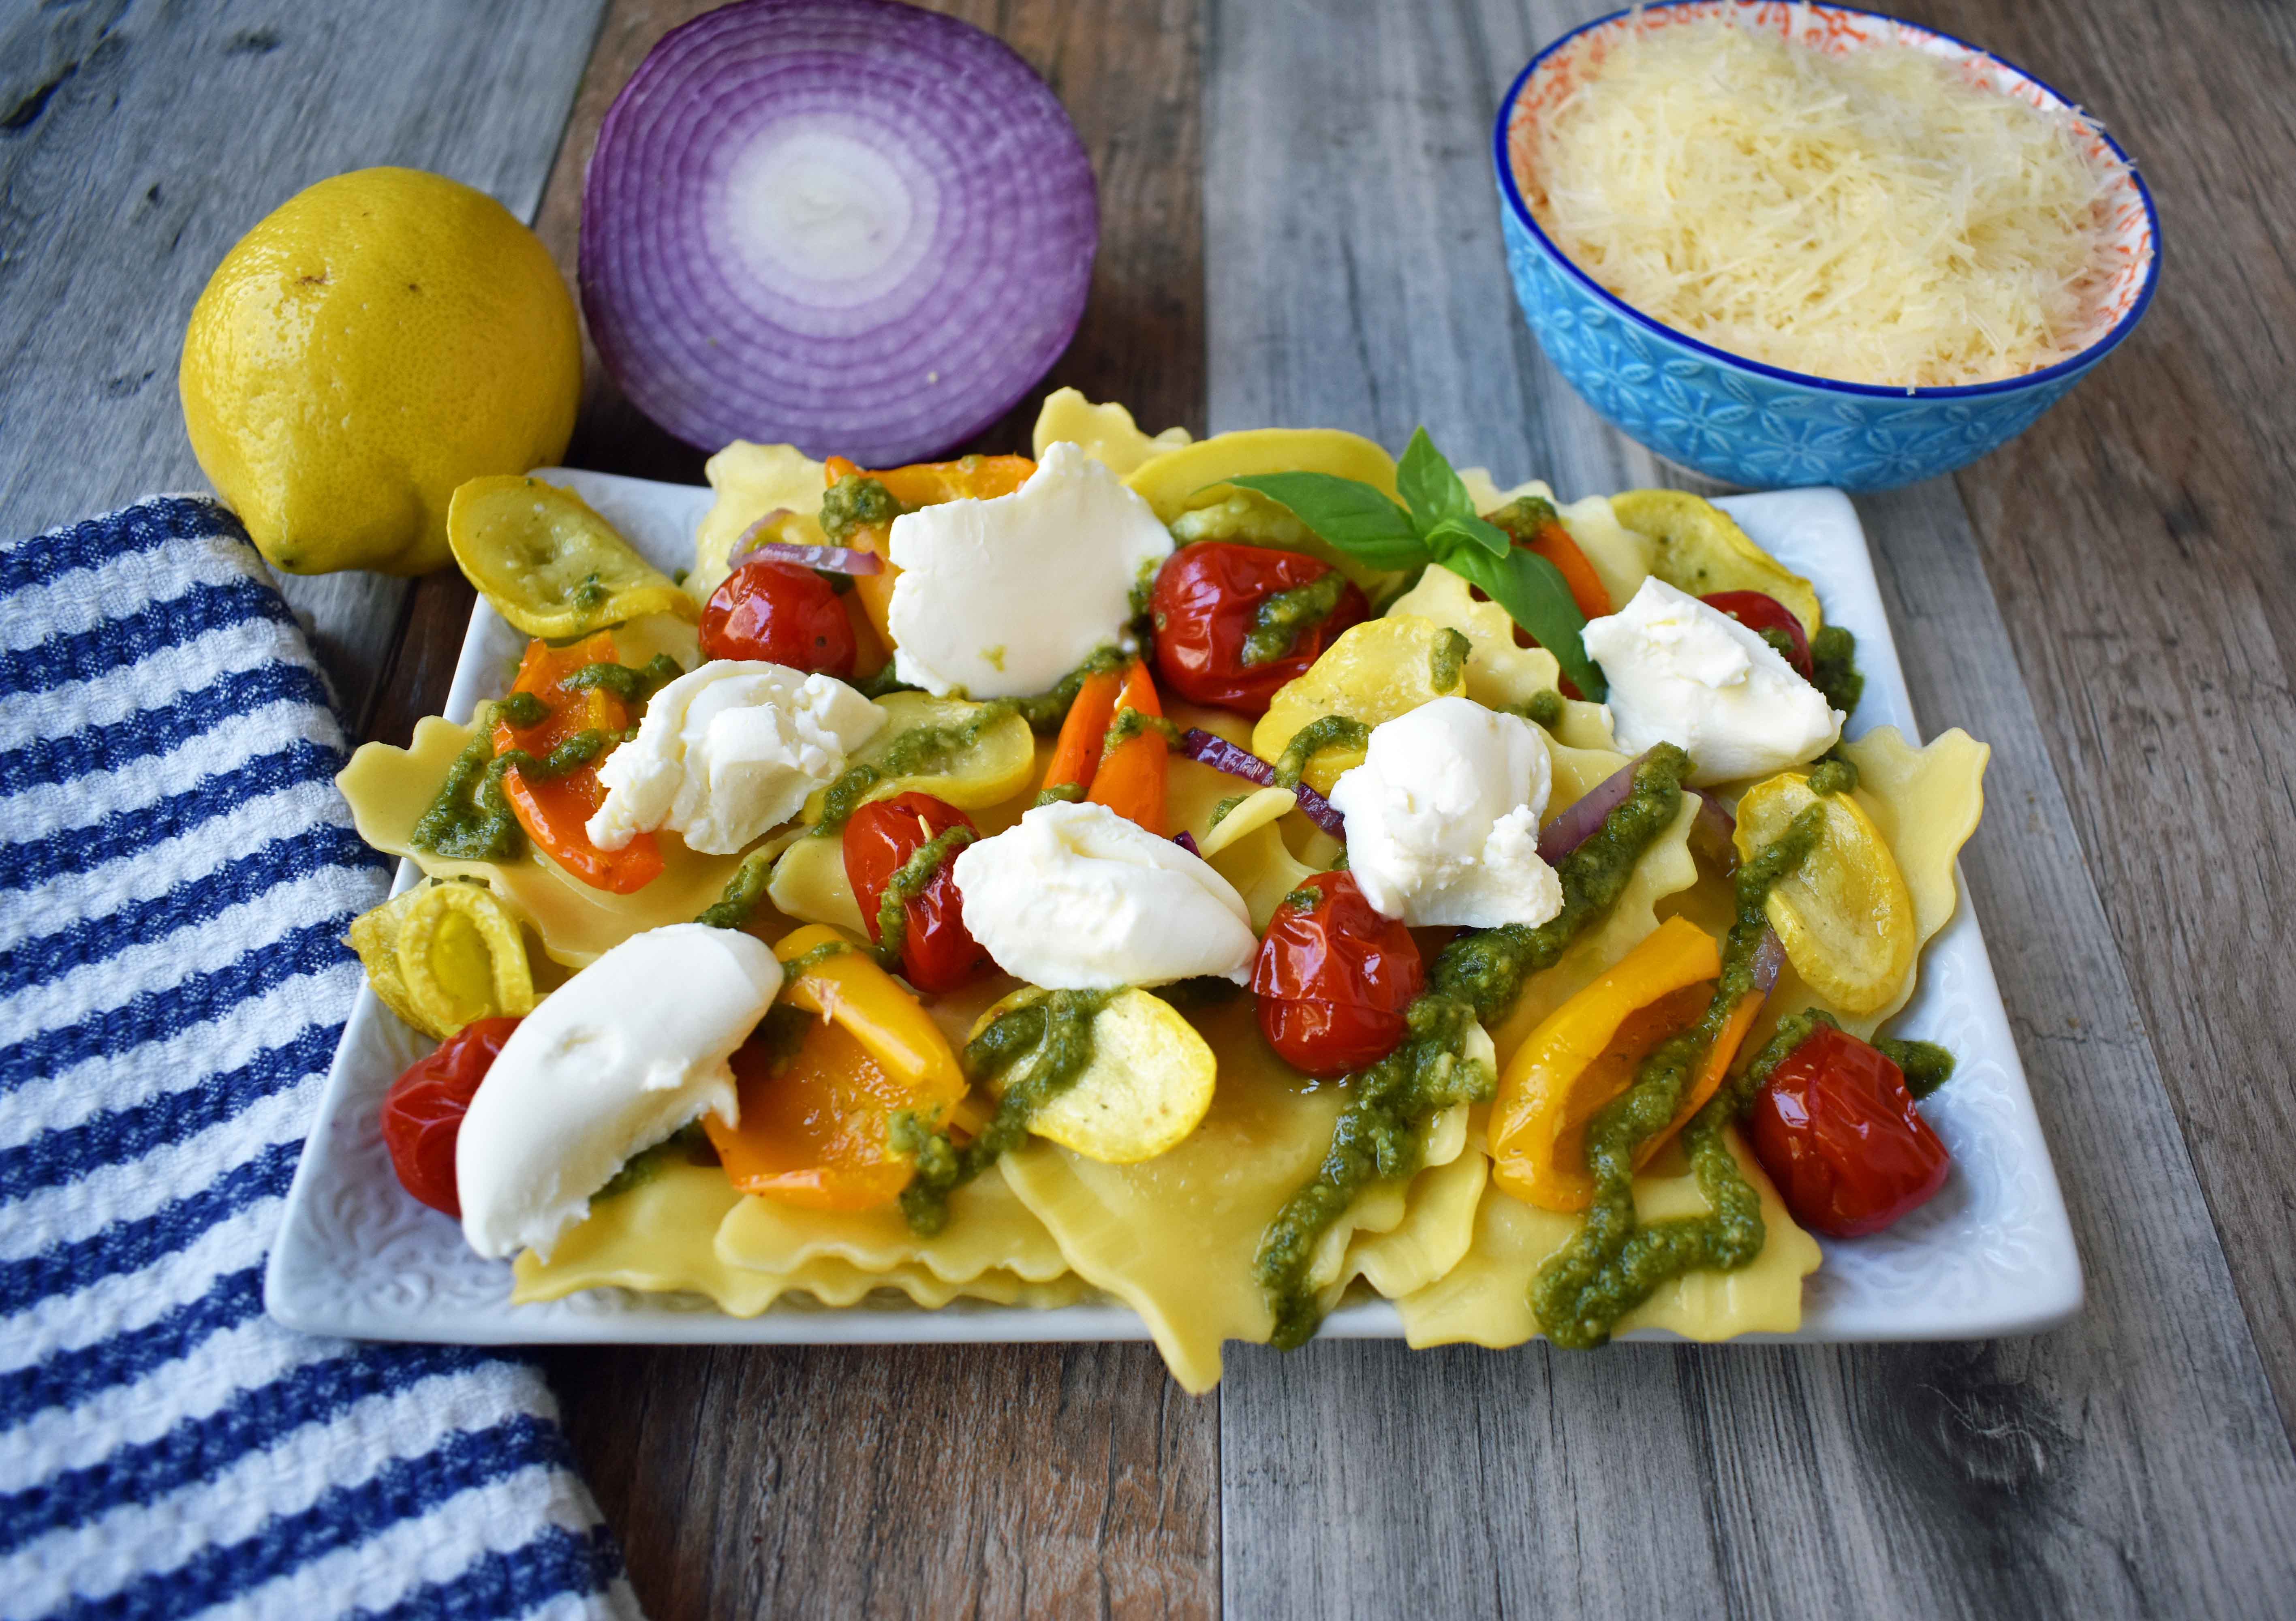 Summer Roasted Vegetable Pesto Ravioli by Modern Honey. This light and fresh summer pasta dish is made with fresh ravioli, tender roasted vegetables, basil pesto sauce, and a touch of mascarpone cheese. A vibrant and healthy pasta dish. www.modernhoney.com